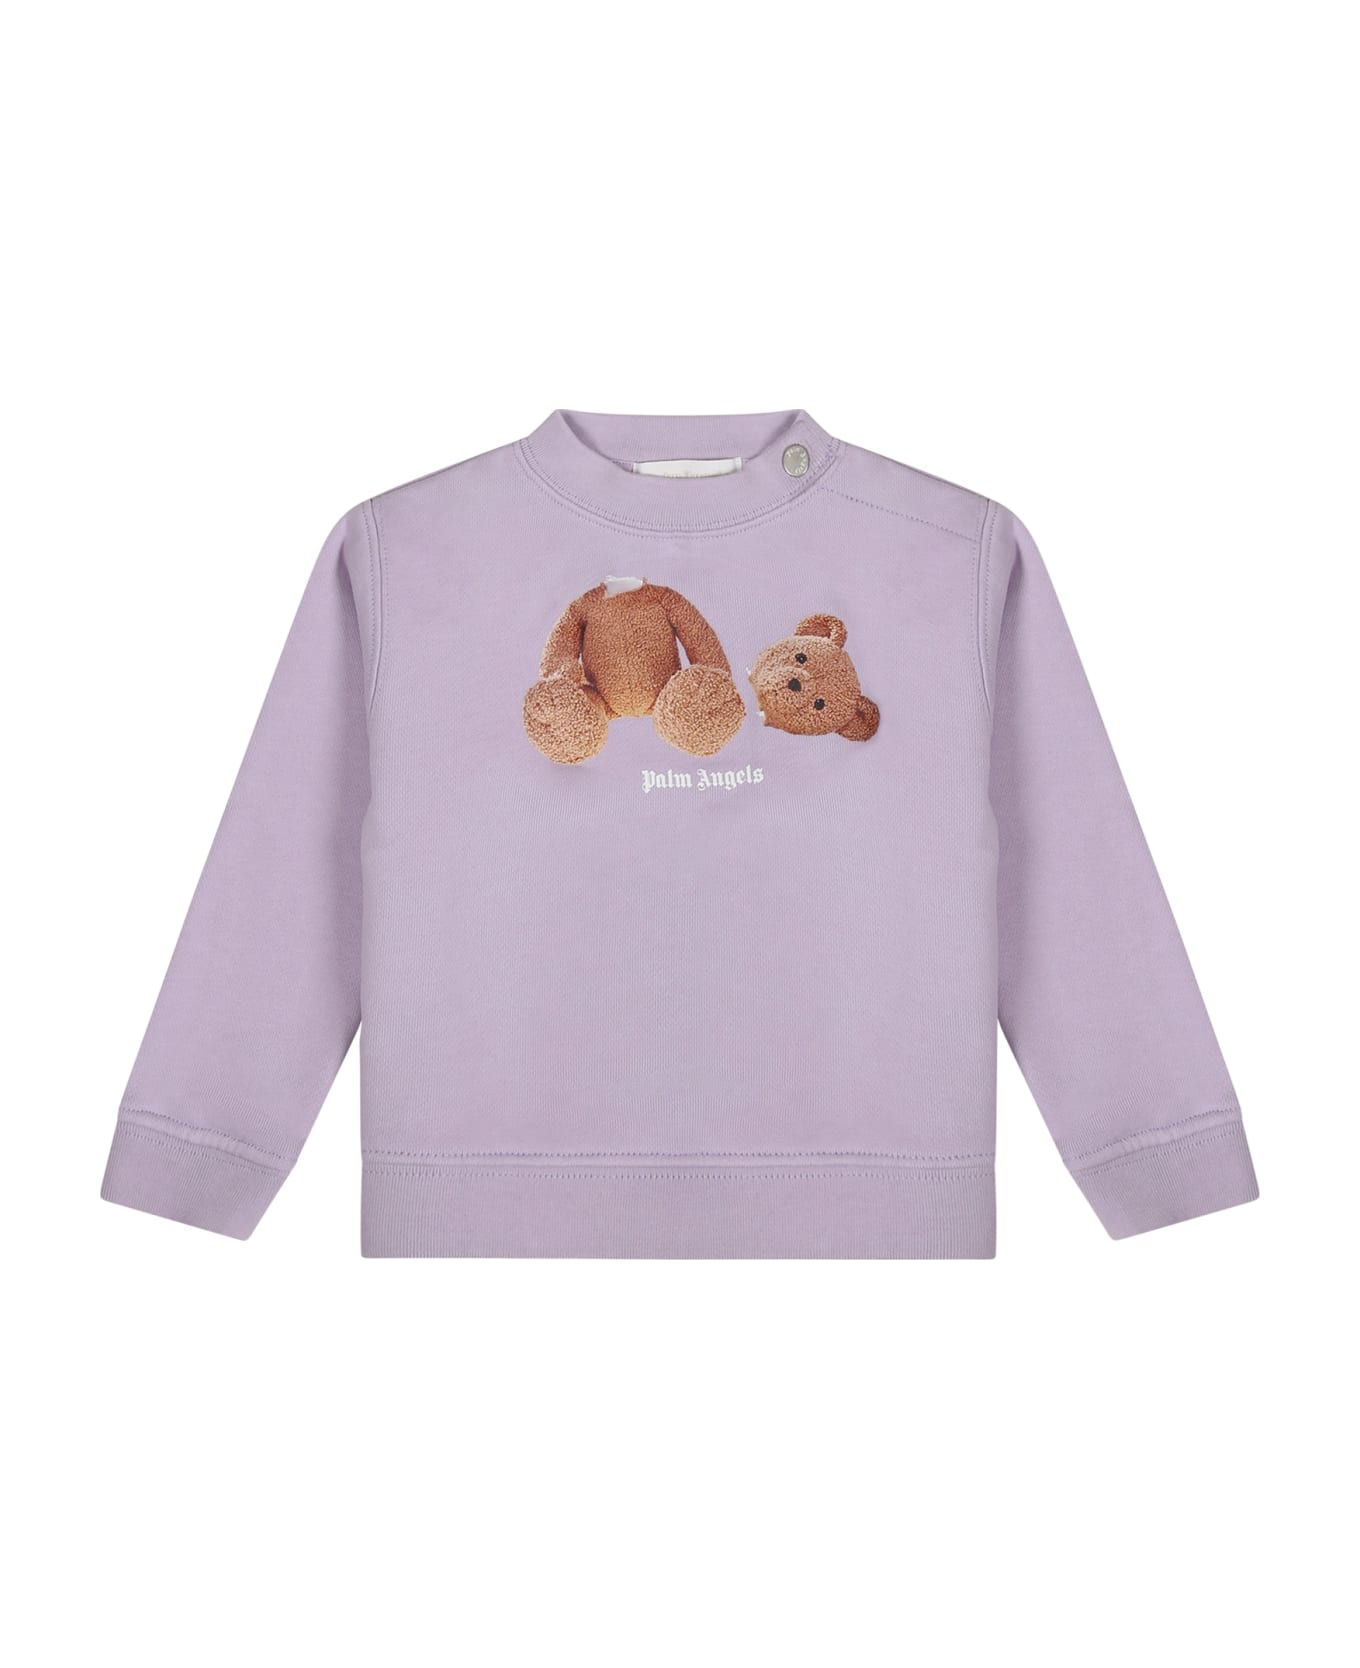 Palm Angels Purple Sweatshirt For Baby Girl With Bear - Violet